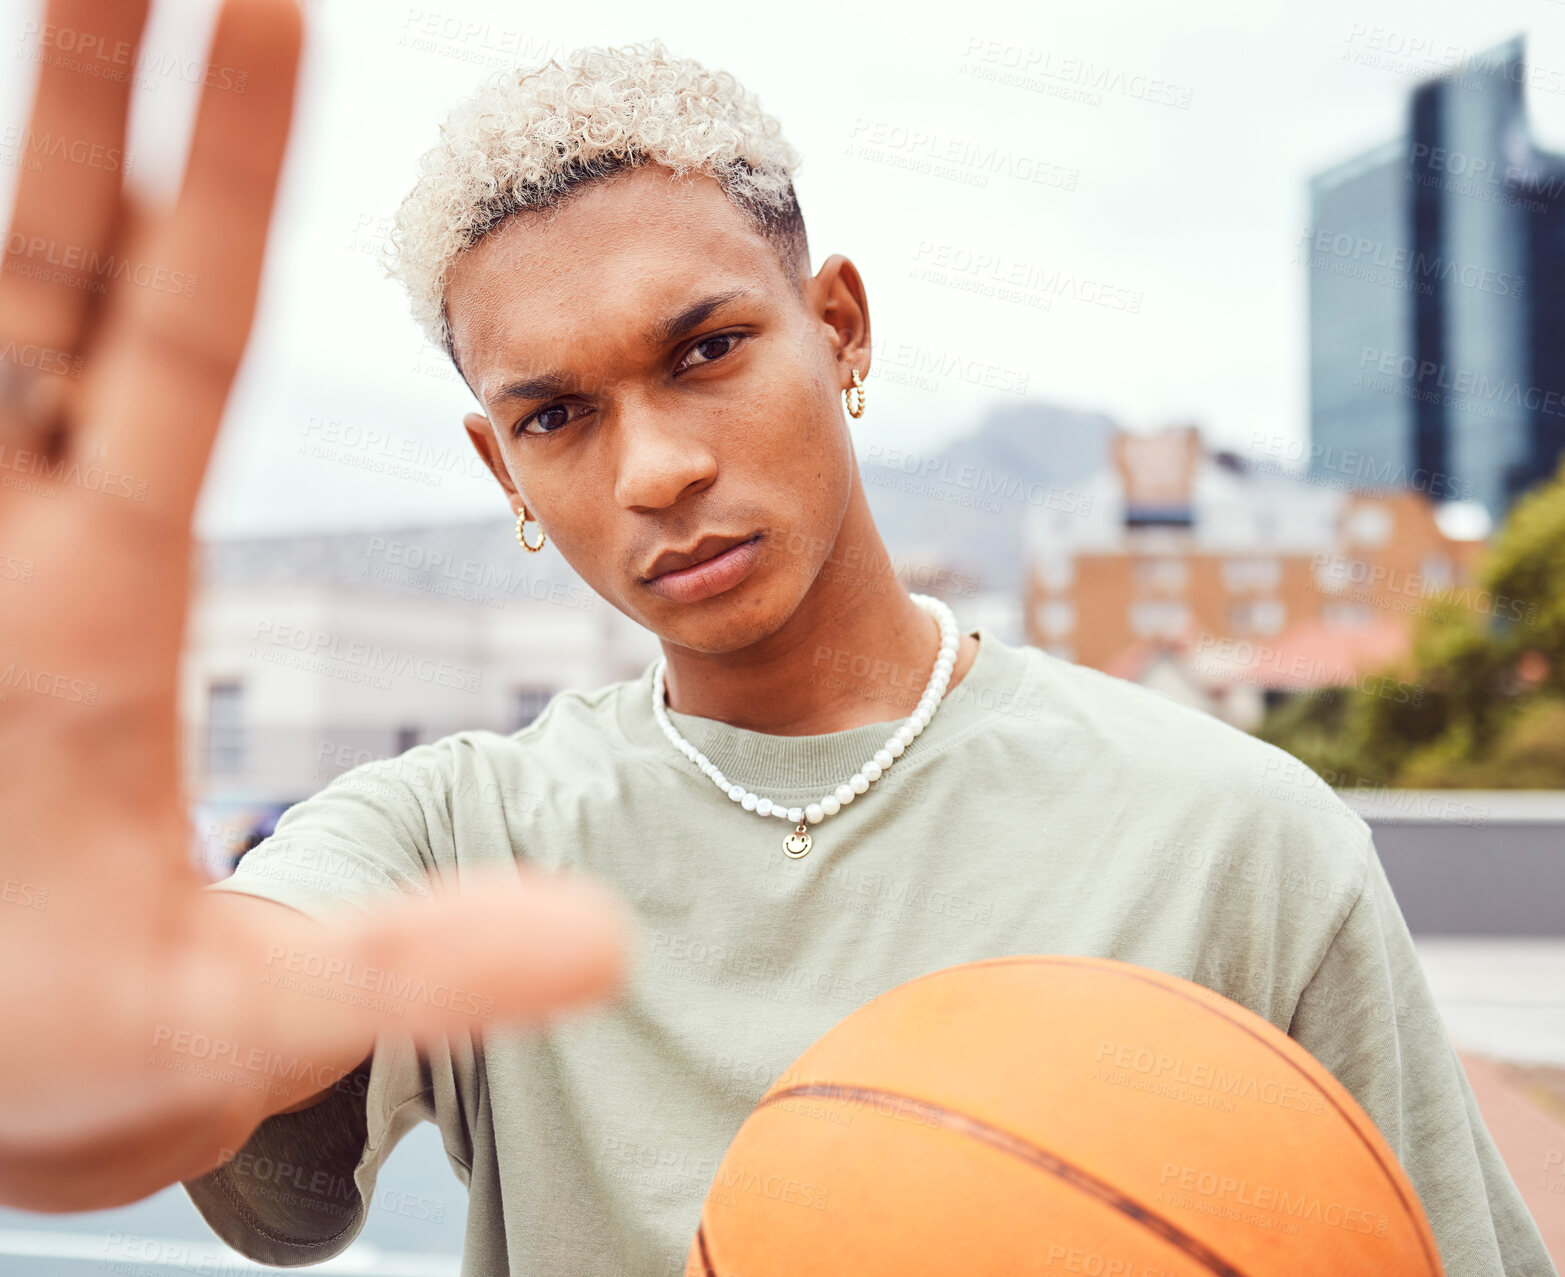 Buy stock photo Sports, selfie and basketball player with fashion with a ball standing on an outdoor court. Fitness, edgy and cool man model and athlete from Brazil posing for a picture with a casual outfit in city 